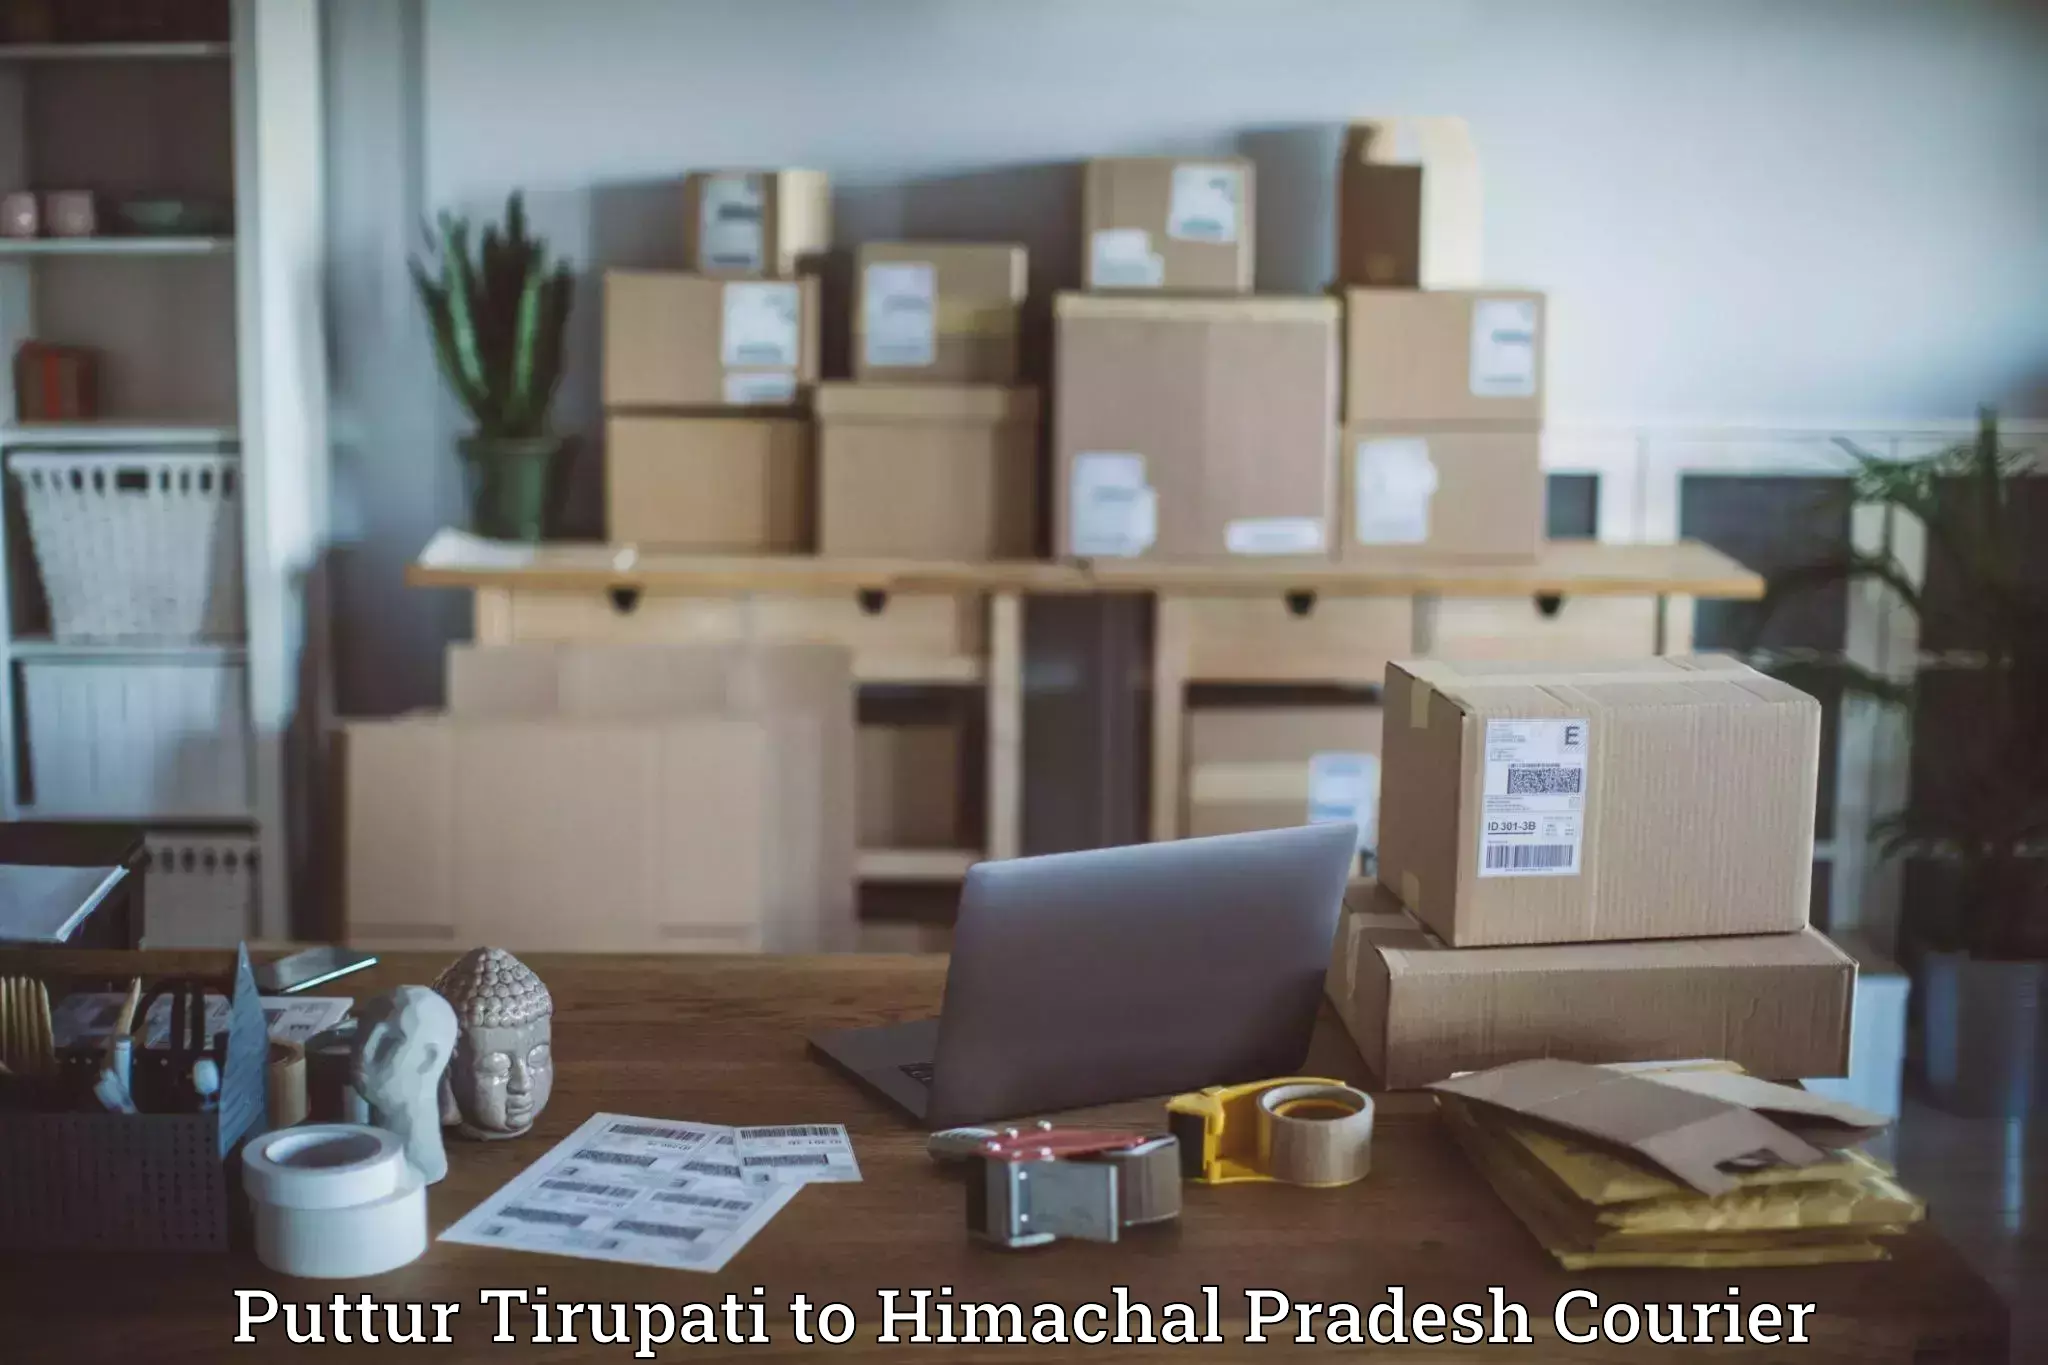 Scalable shipping solutions Puttur Tirupati to Dheera